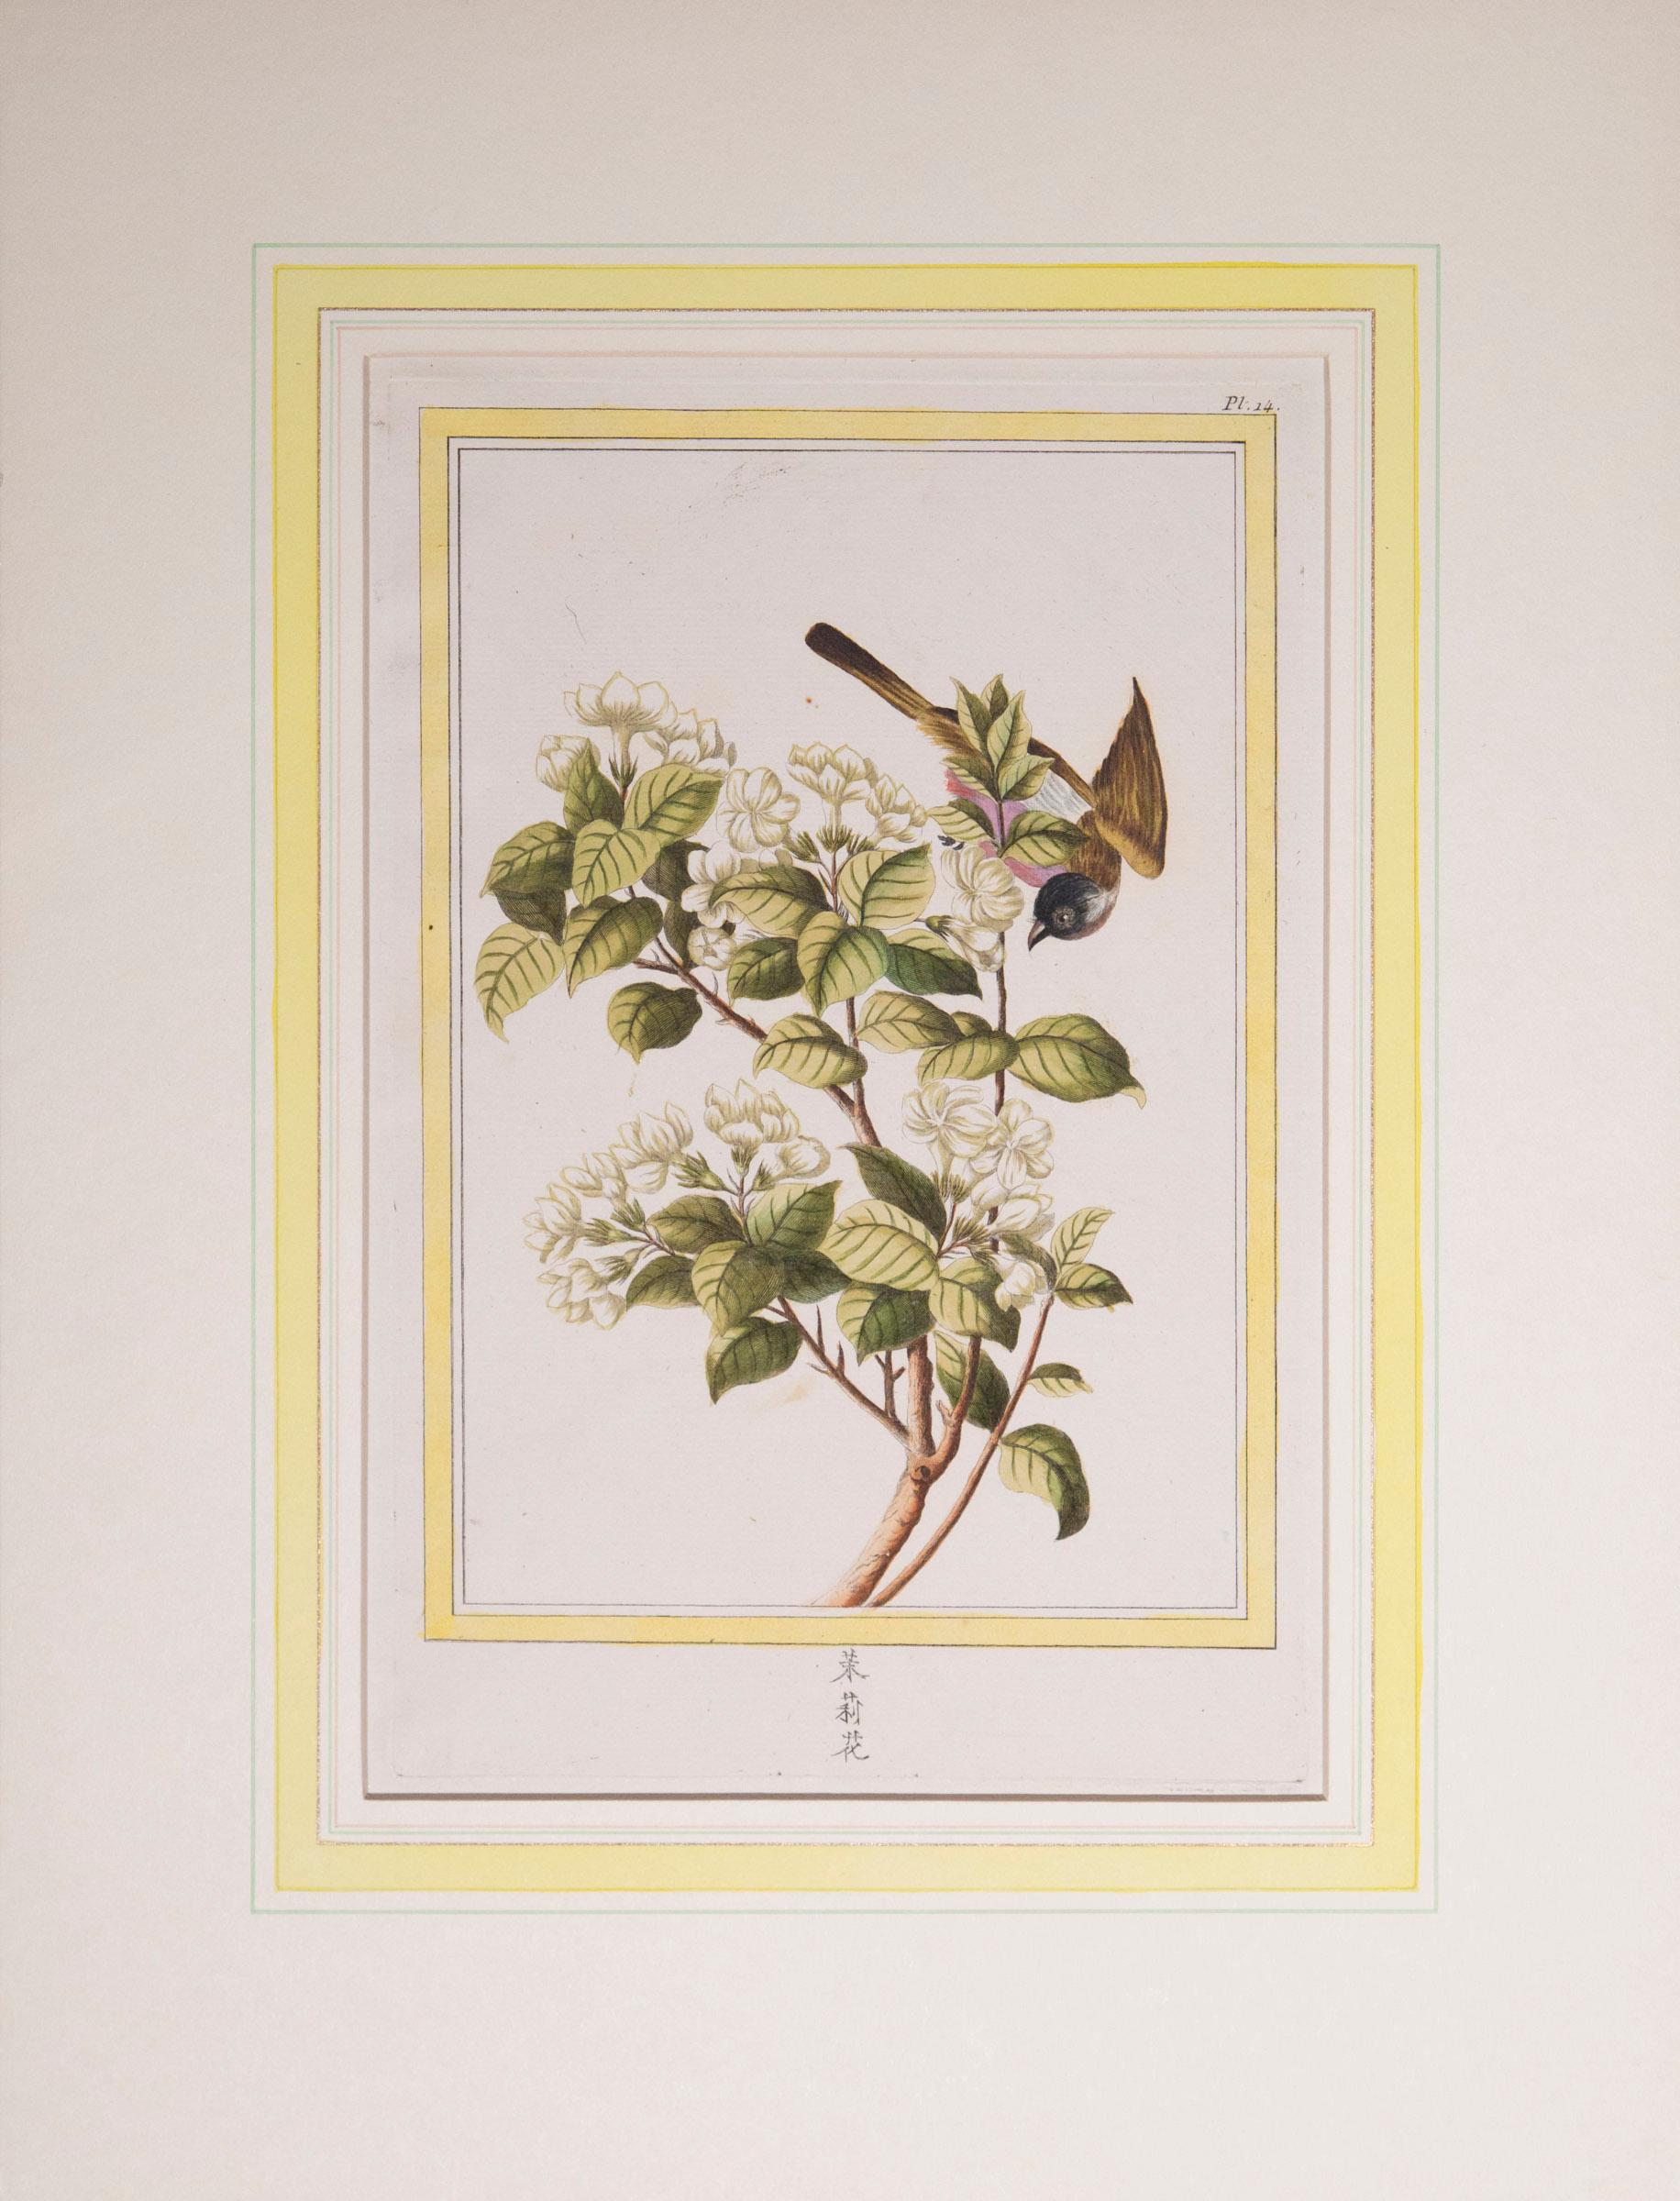 Set of Six 18th Century Hand-Colored Botanical Prints, P.J. Buchoz, 1776 In Good Condition For Sale In London, GB